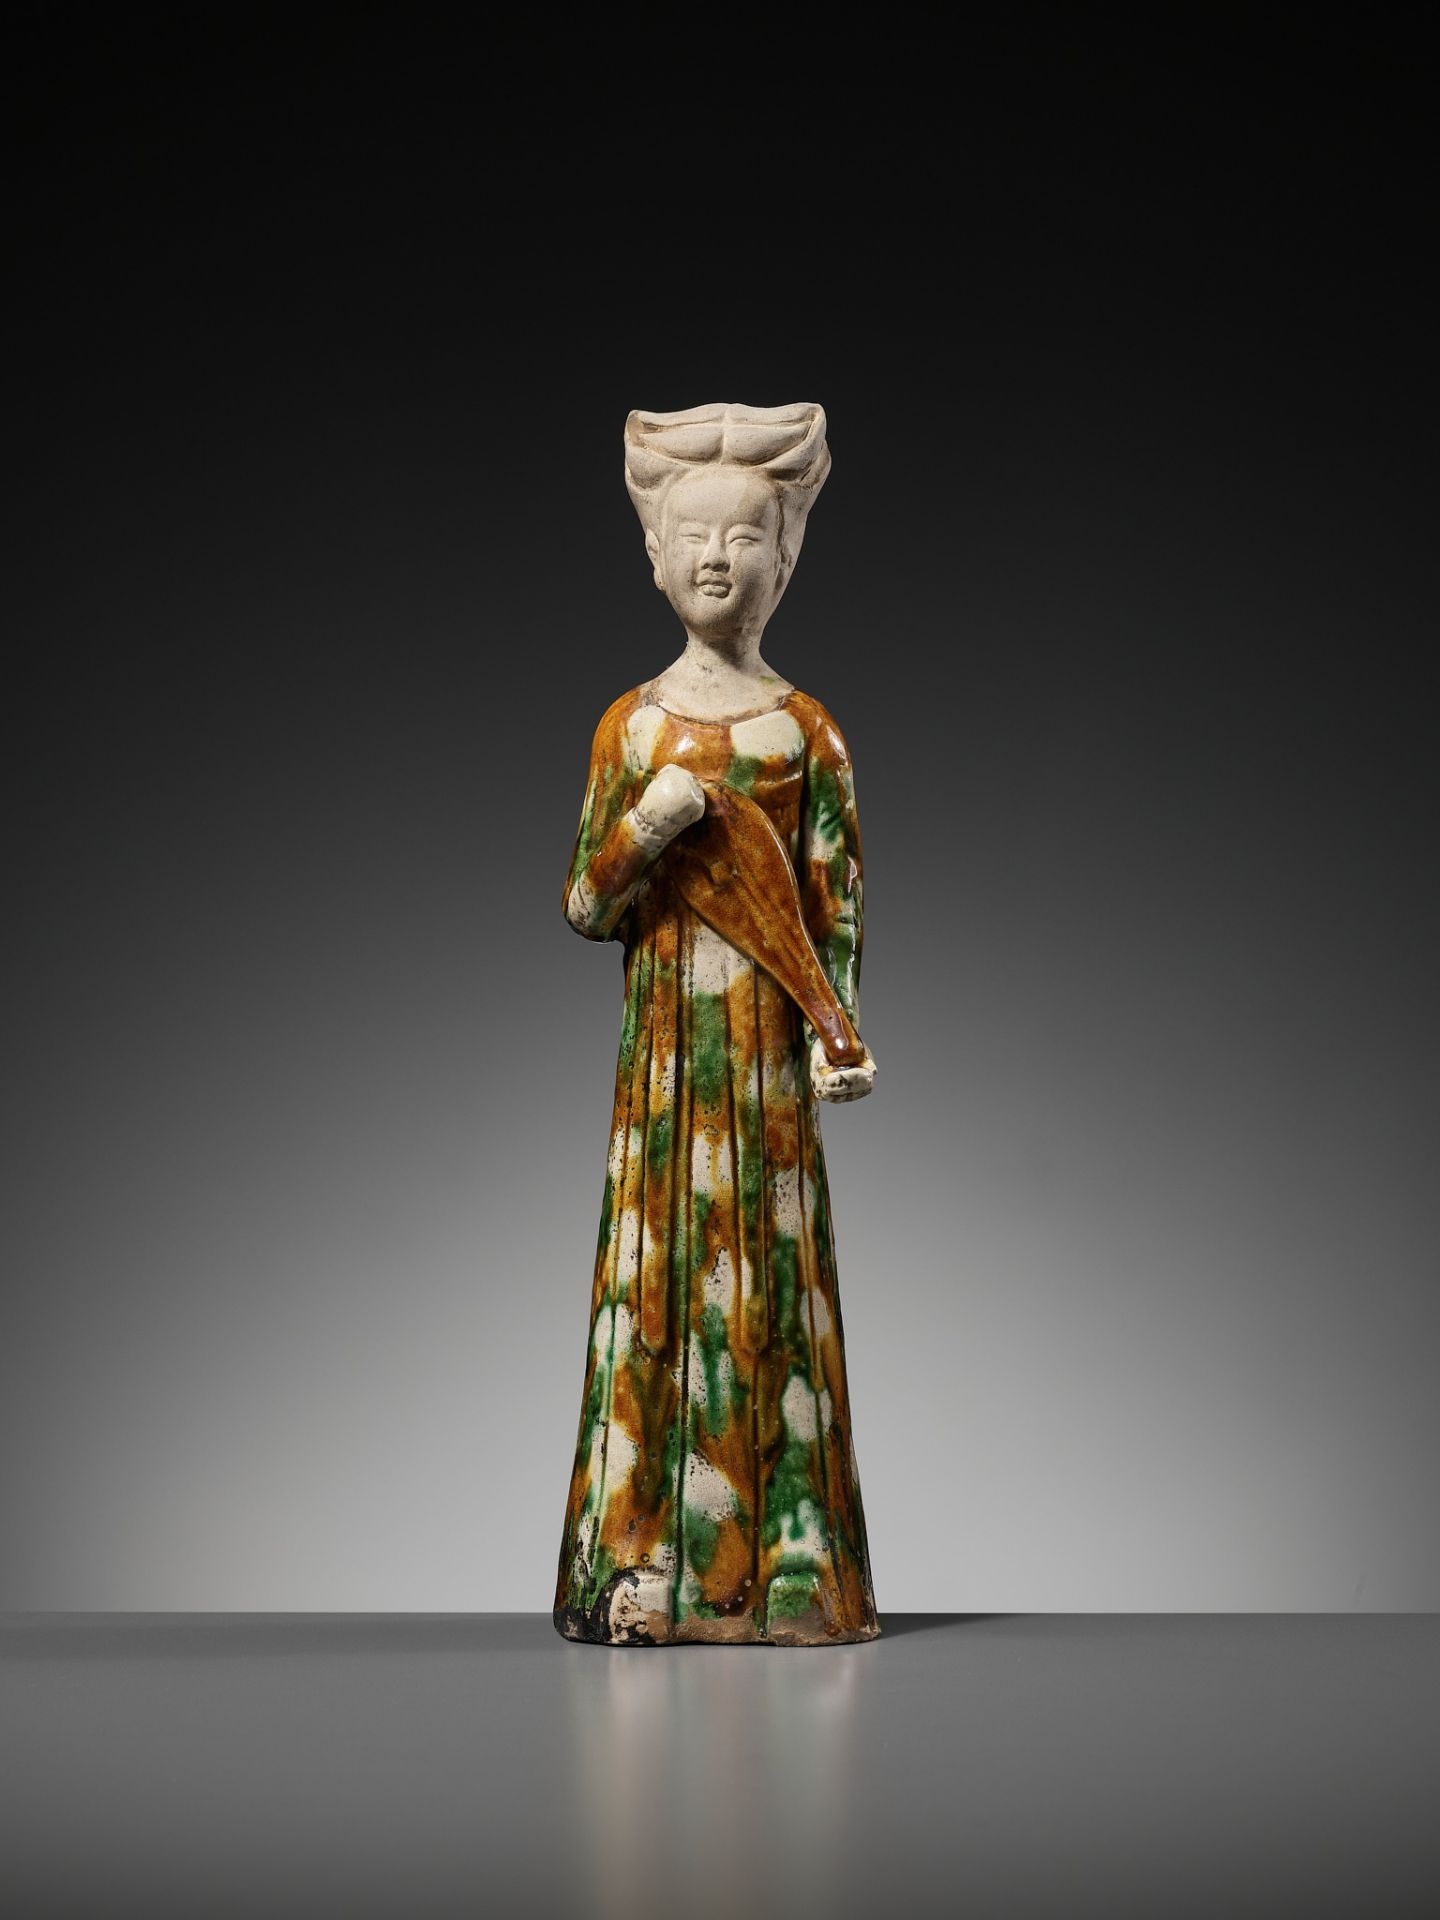 A SANCAI GLAZED POTTERY FIGURE OF A FEMALE MUSICIAN PLAYING THE PIPA, TANG DYNASTY - Image 2 of 13